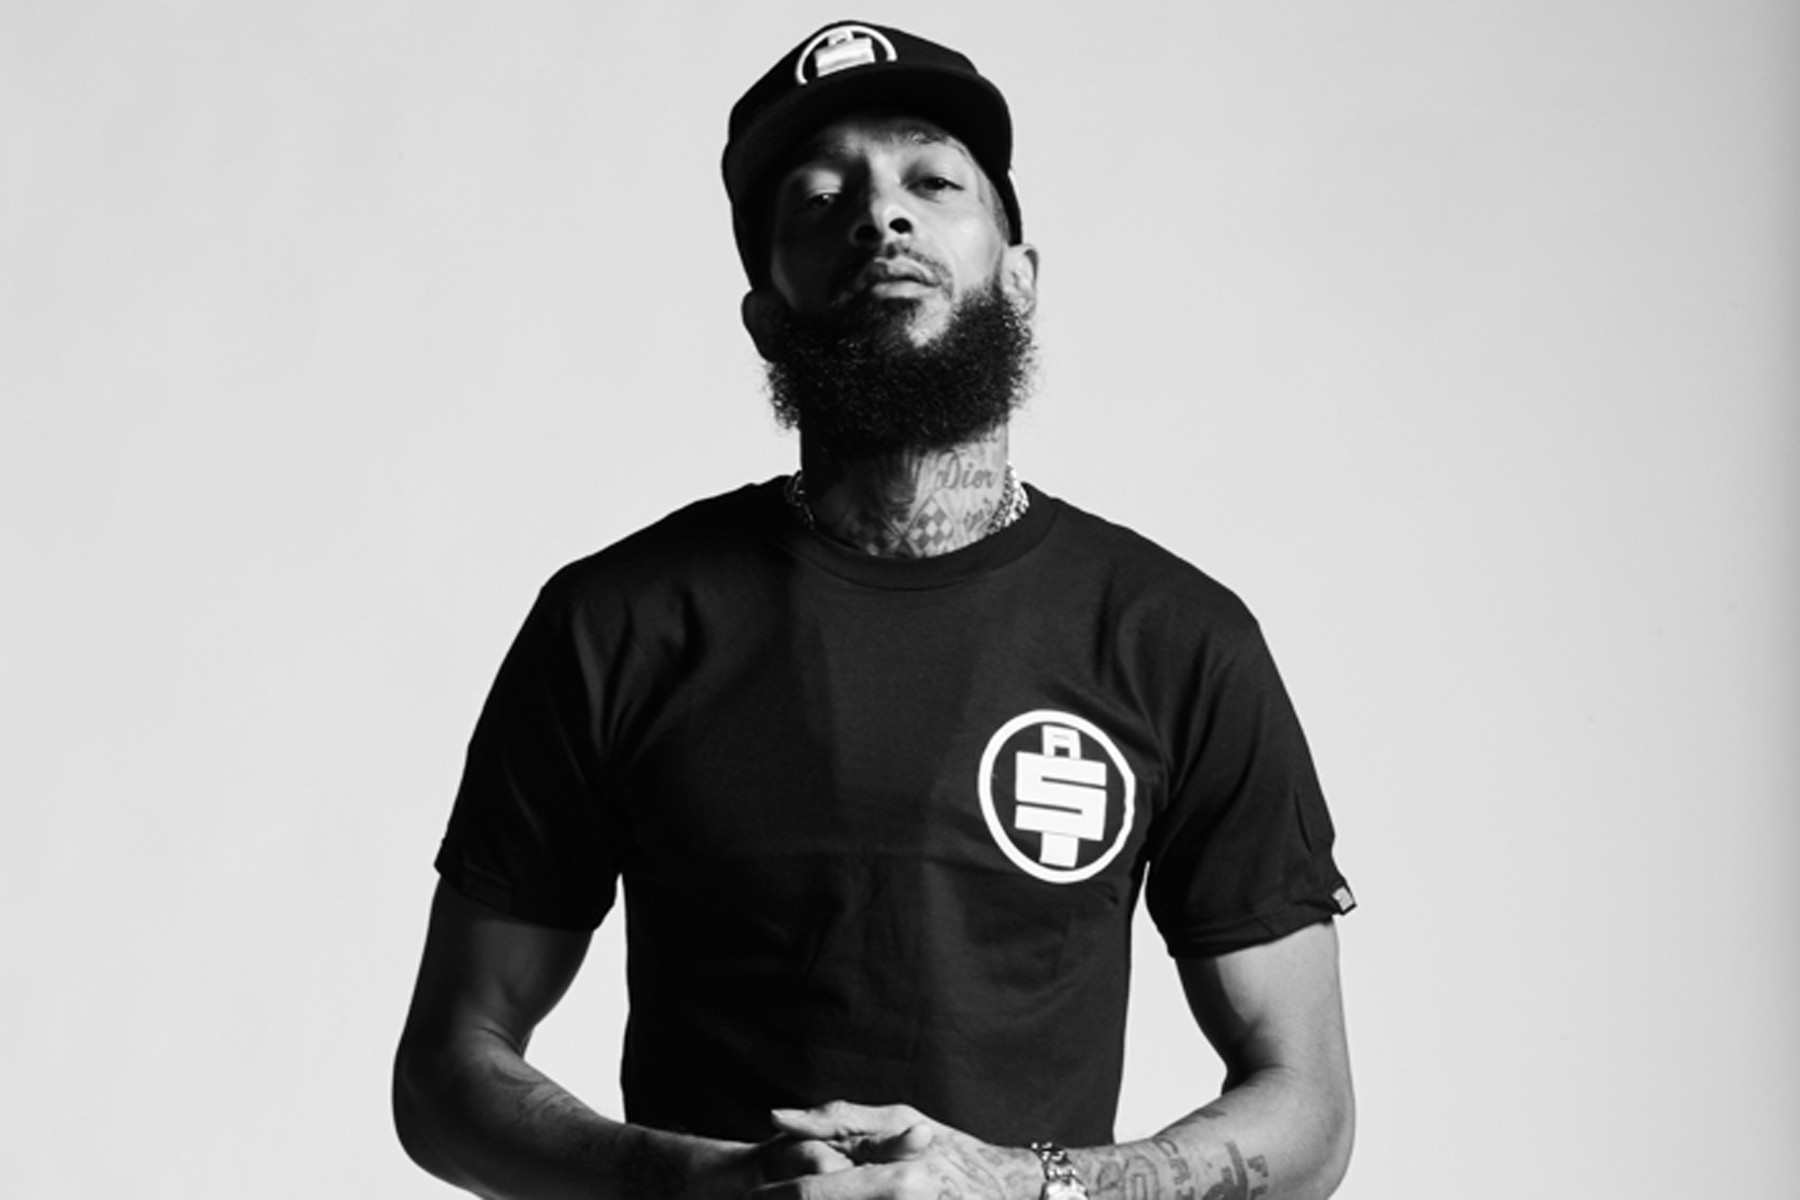 Swimming One Last Victory Lap – A ‘Thank You’ to Nipsey Hussle & Mac Miller